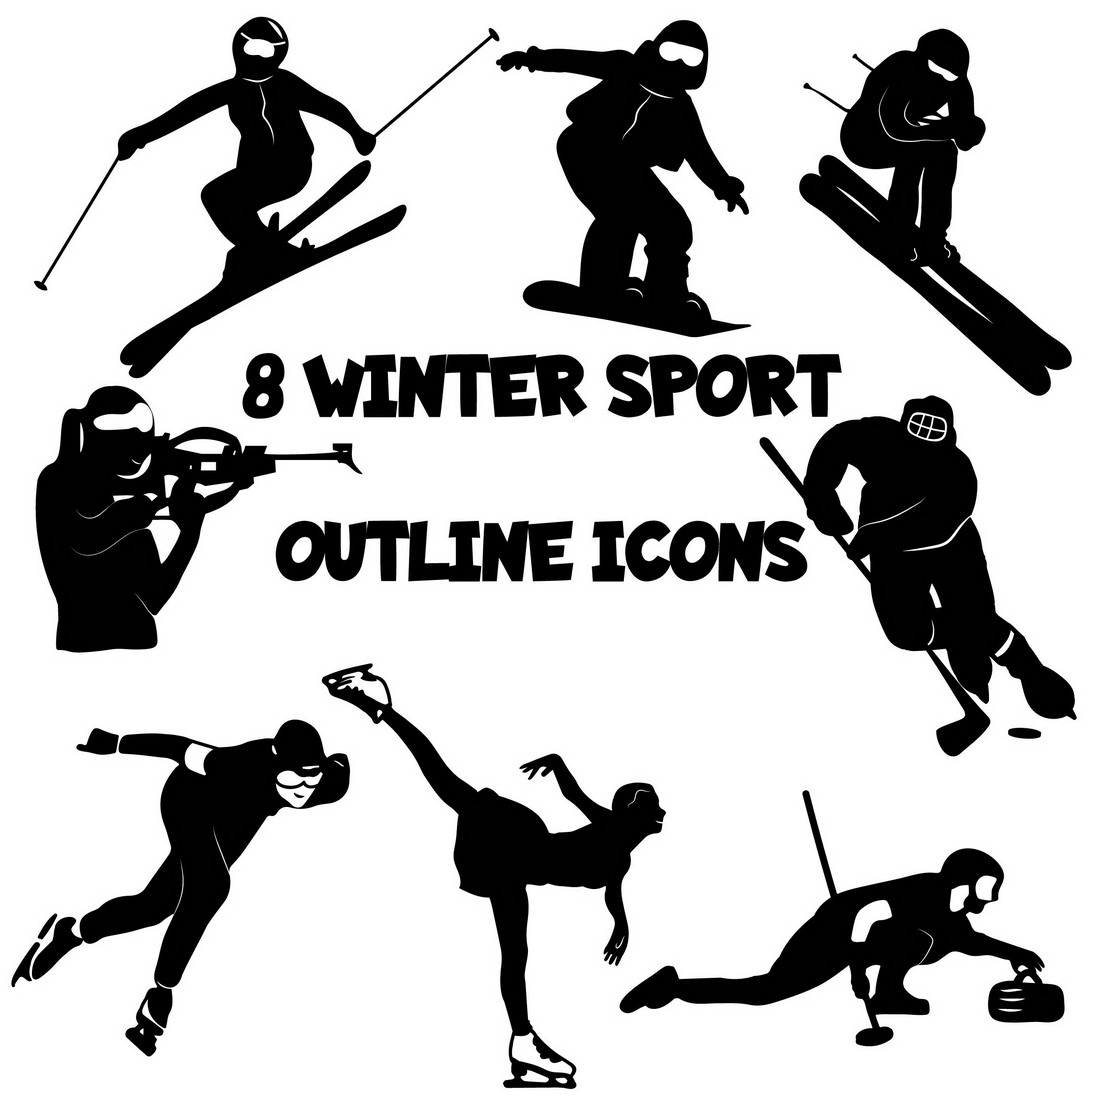 Winter Sport Outline Icons cover image.